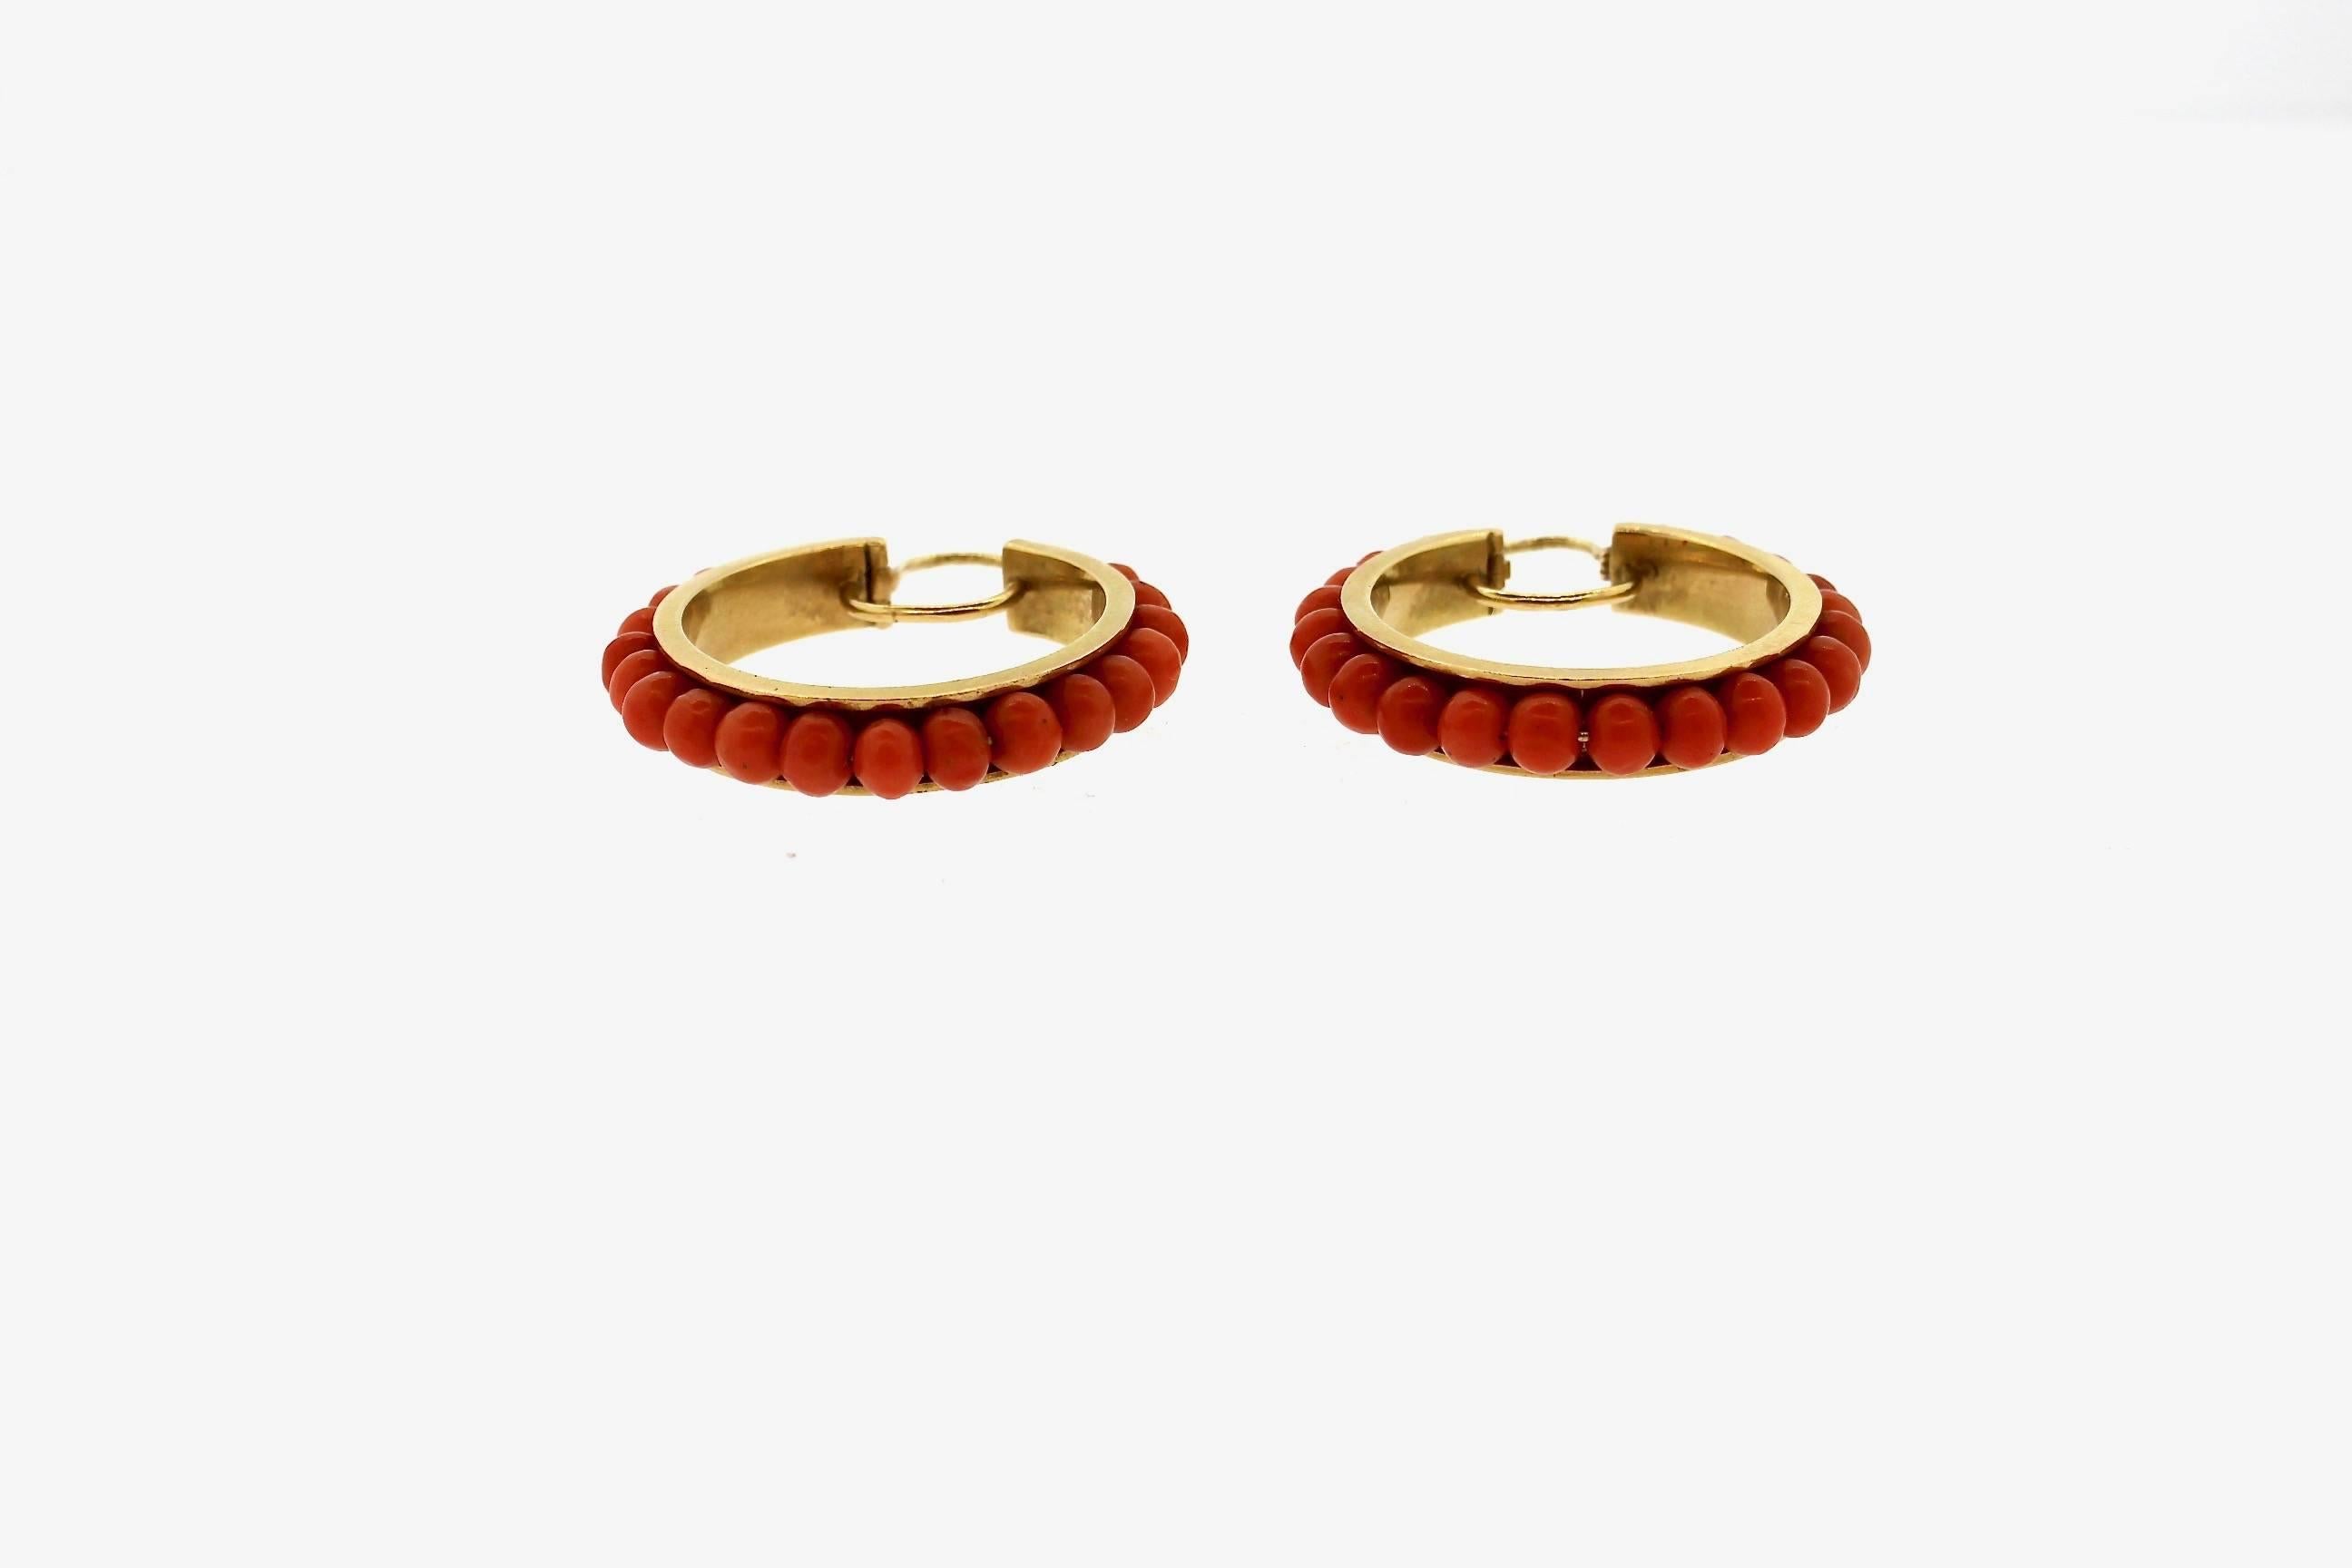 The bright color of coral make these hoop earrings pop.  This fun creole style coral bead hoop earrings date to about the 1960s.  They coral beads are strung along a wire, and channel set in the 18k gold.  This earring is effortlessly chic and